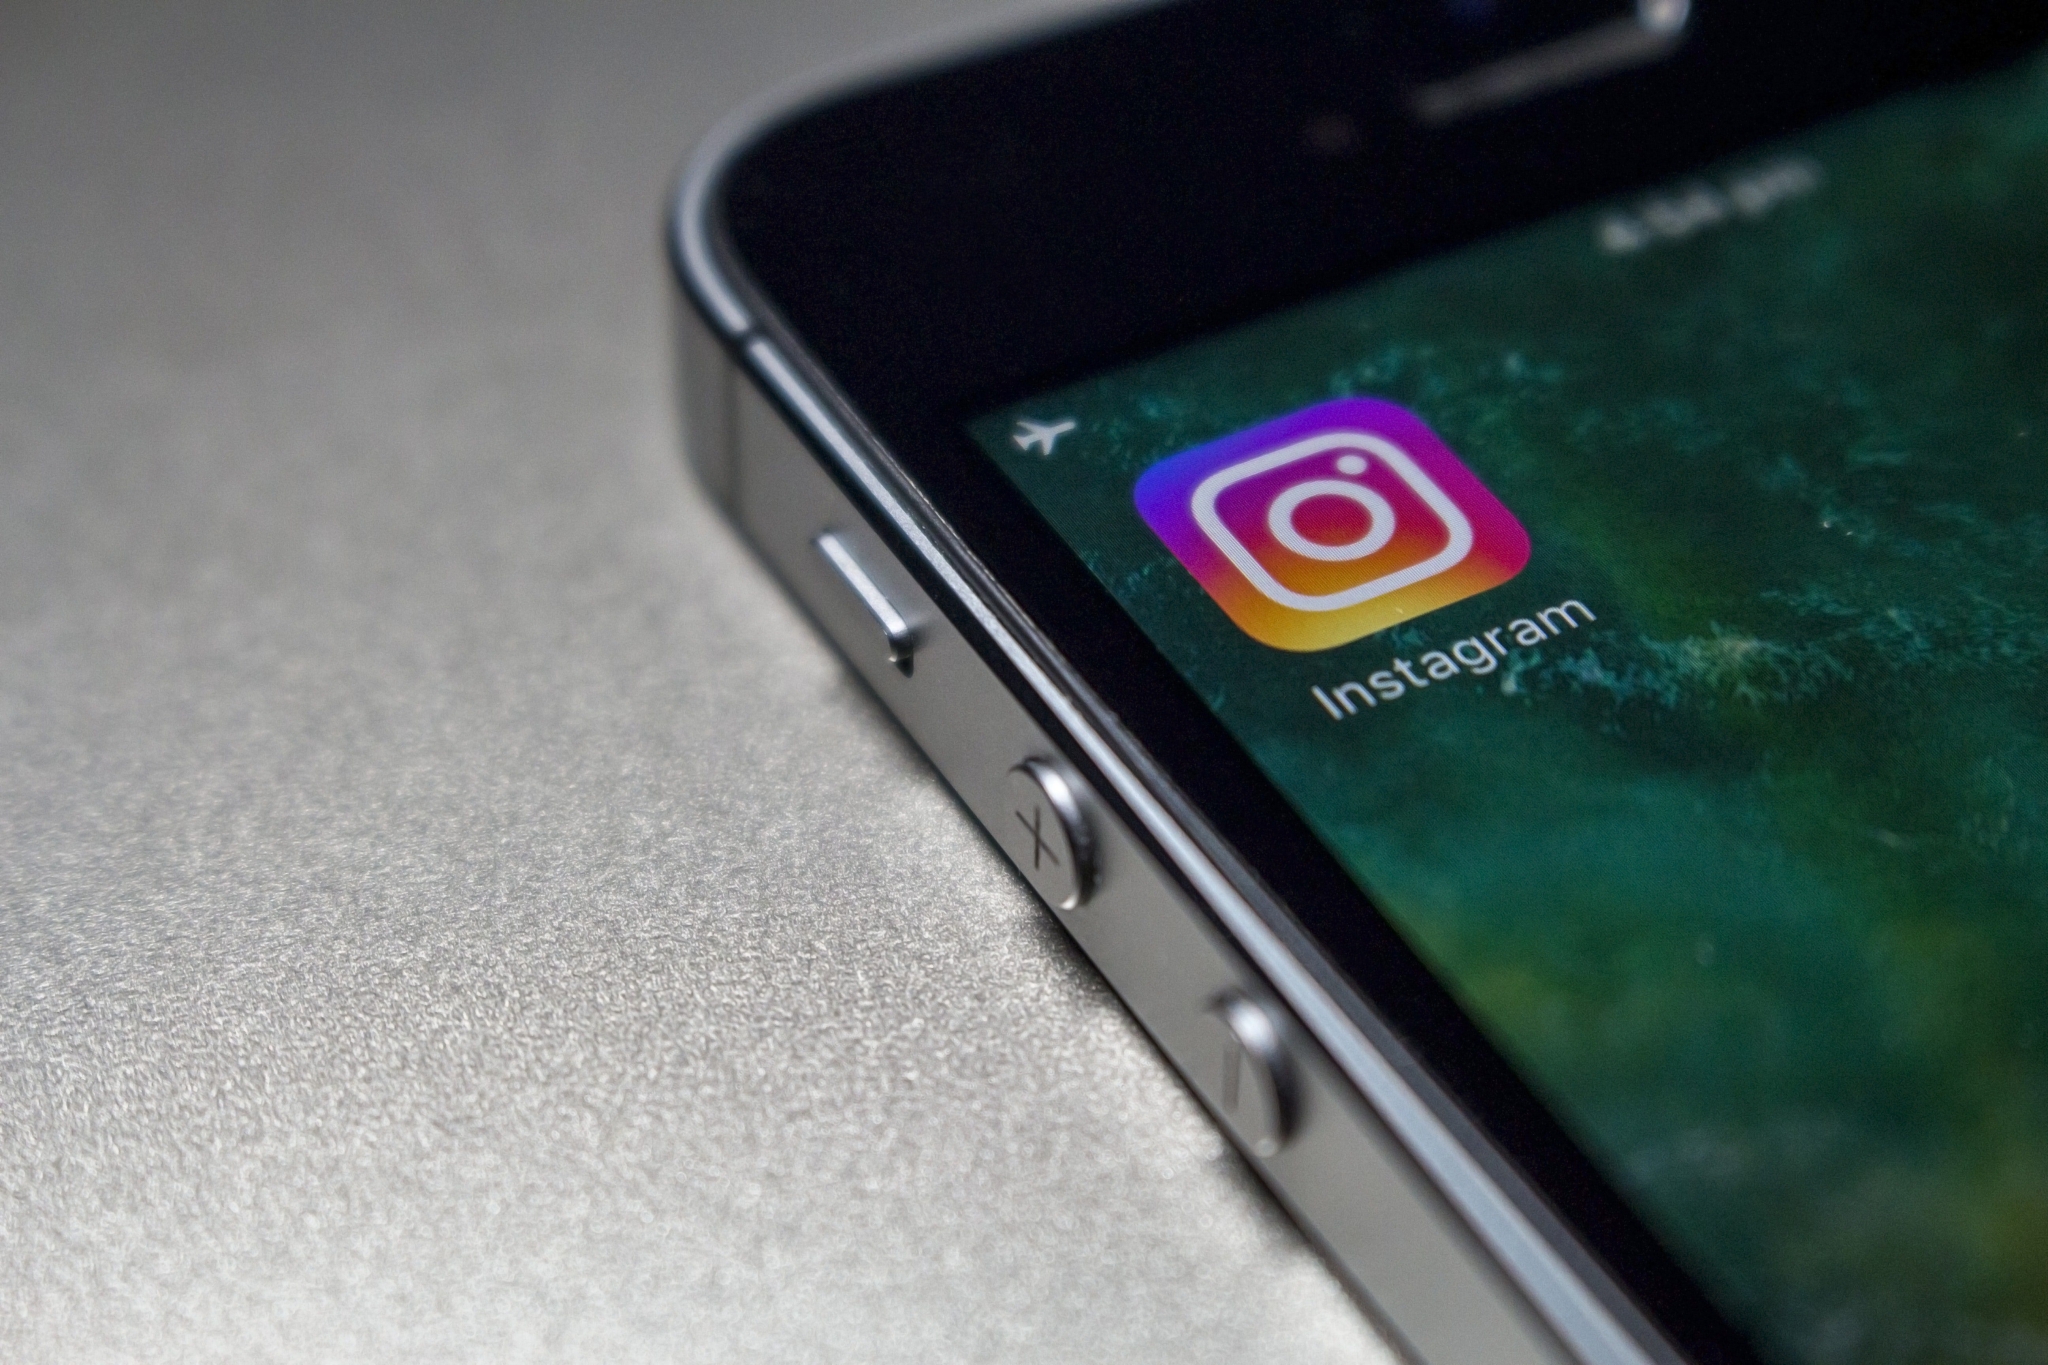 Instagram Guides: What Are They and How Can Brands Take Advantage Of Them?